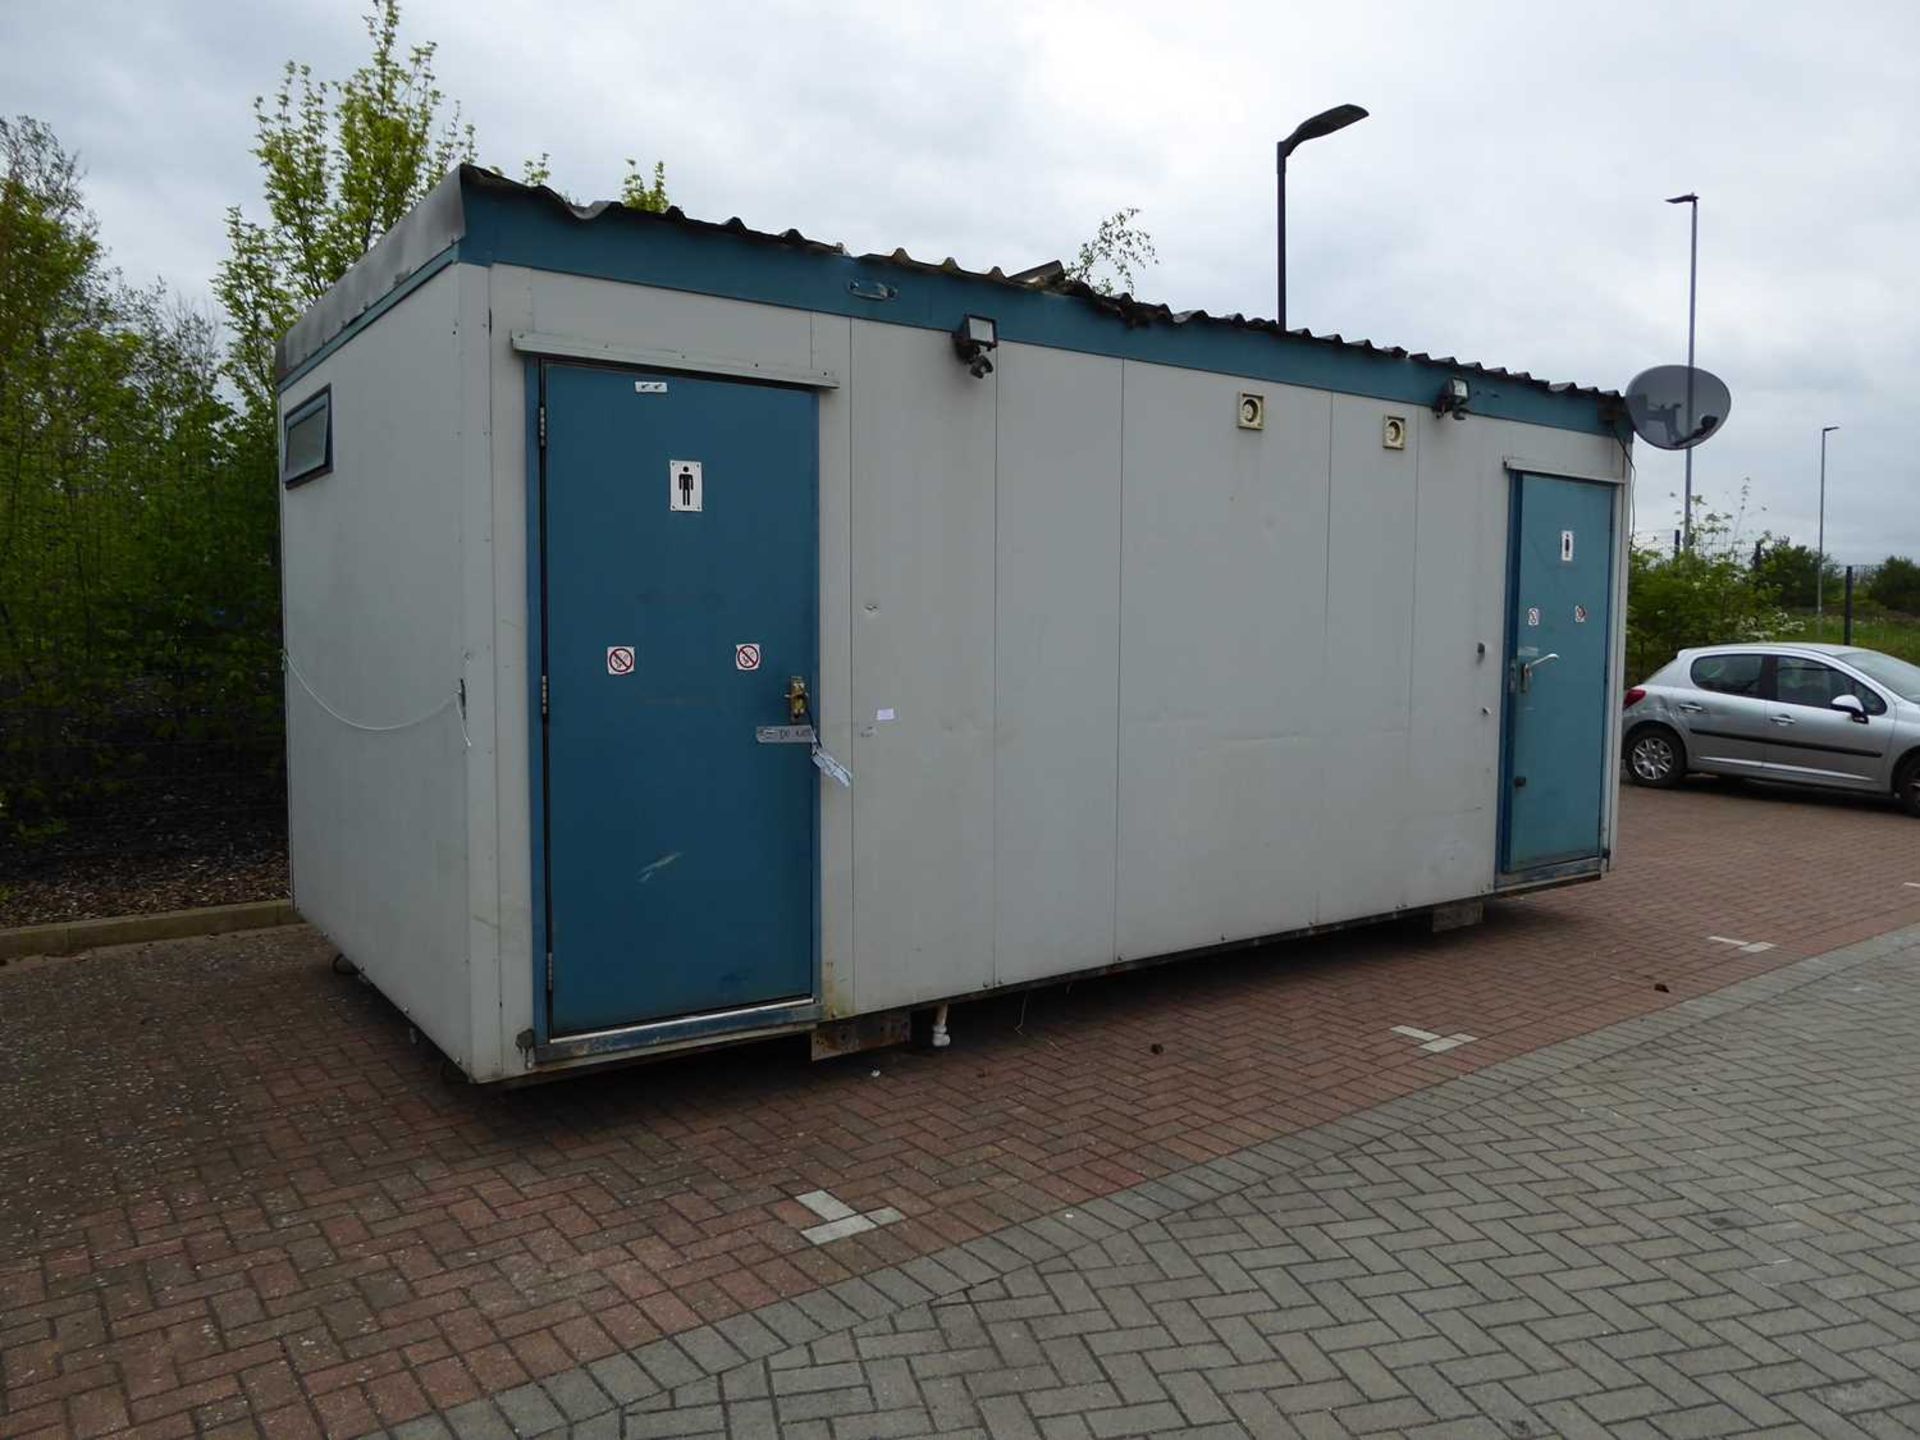 20ft x 9ft 6” metal clad portable toilet block comprising ladies and gents finished in blue and